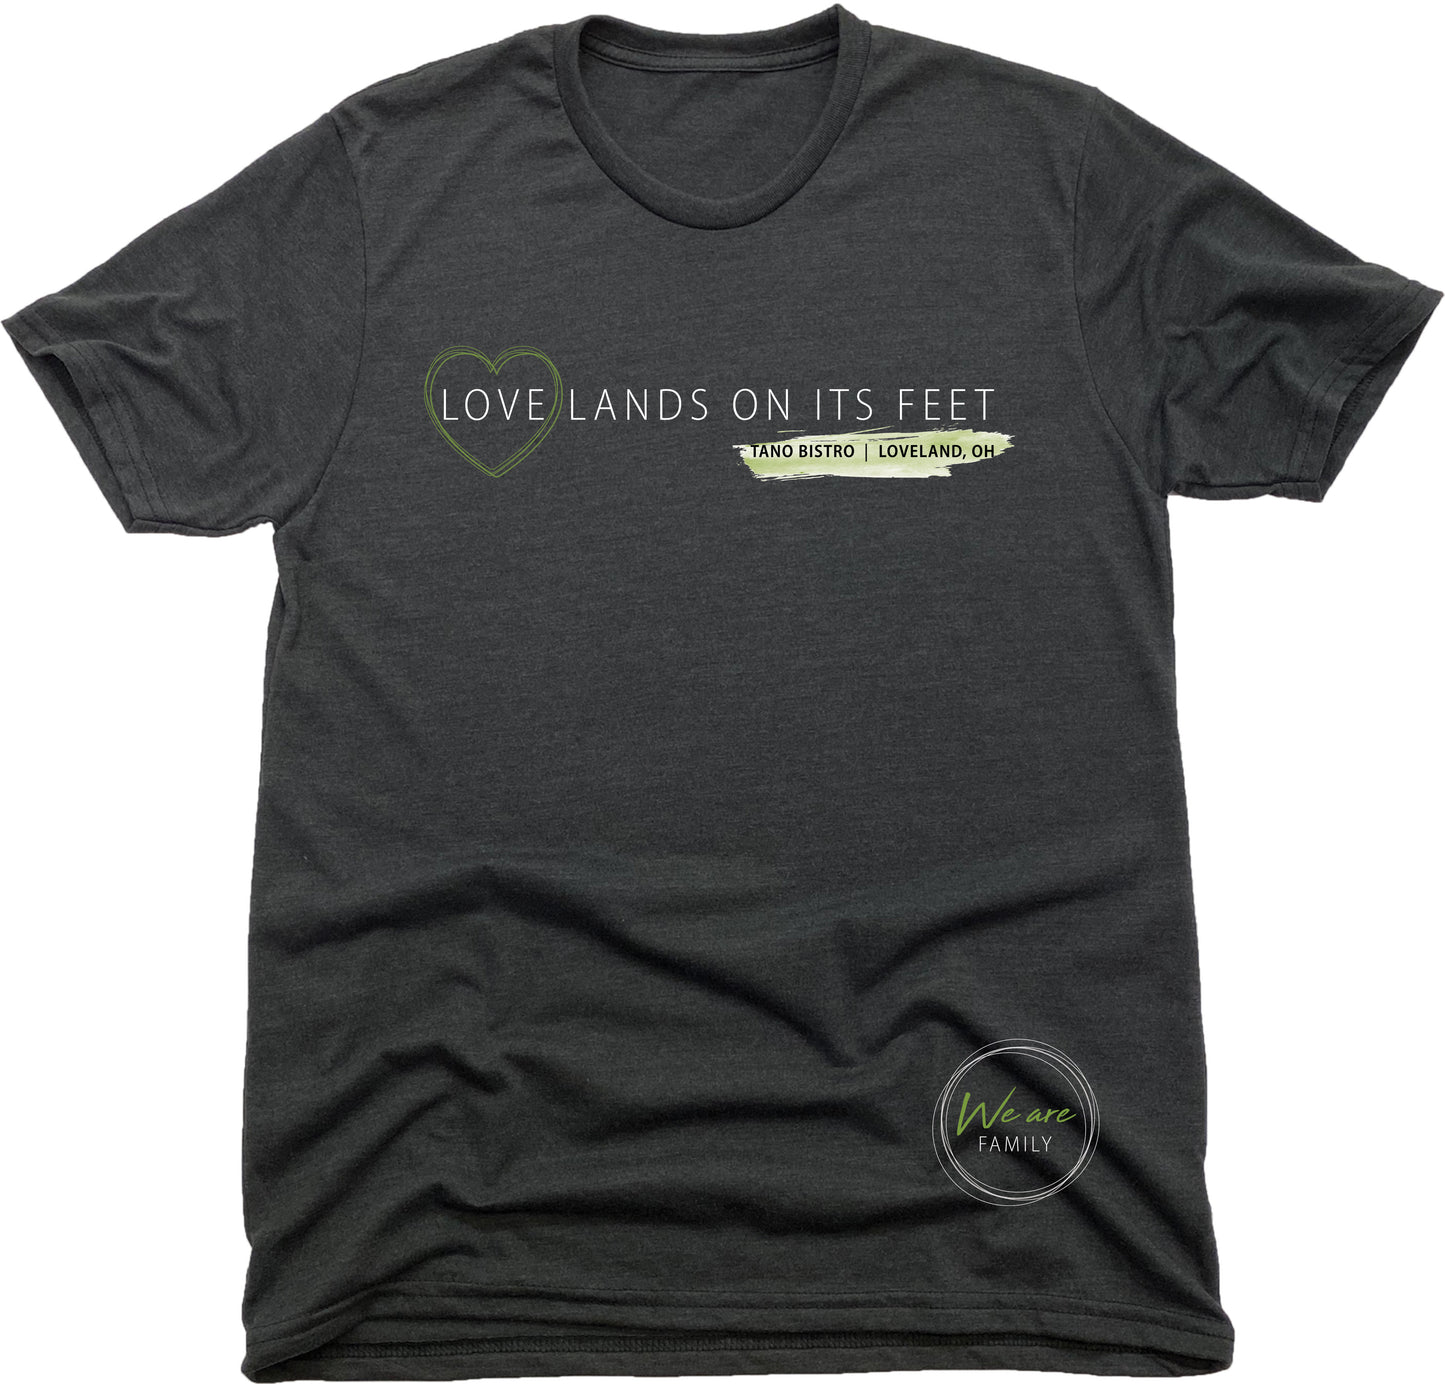 TANO BISTRO | UNISEX BLACK Recycled Tri-Blend | LOVE LANDS ON ITS FEET